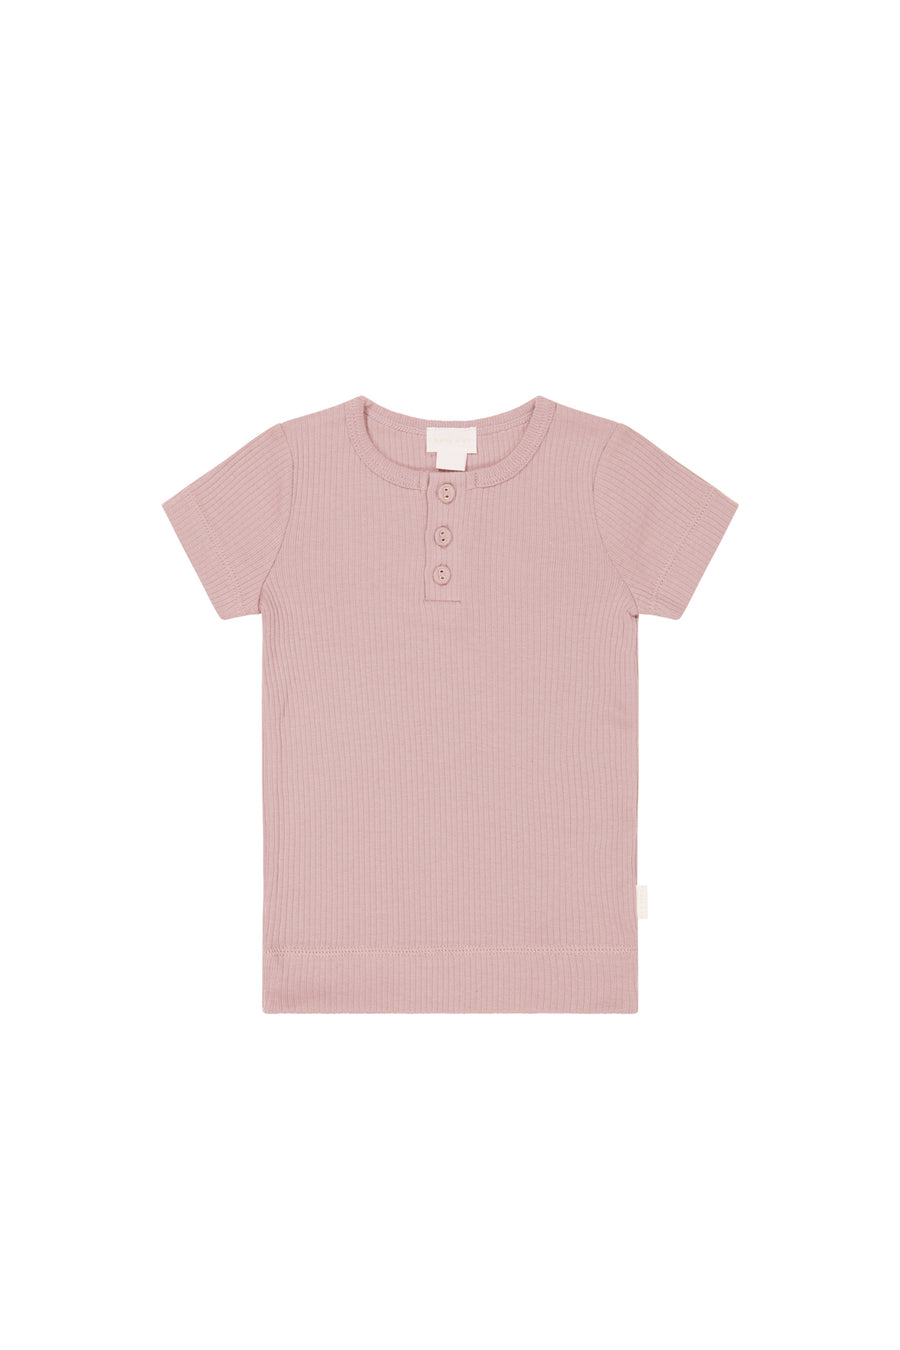 Organic Cotton Modal Henley Tee - Doll Childrens Top from Jamie Kay USA